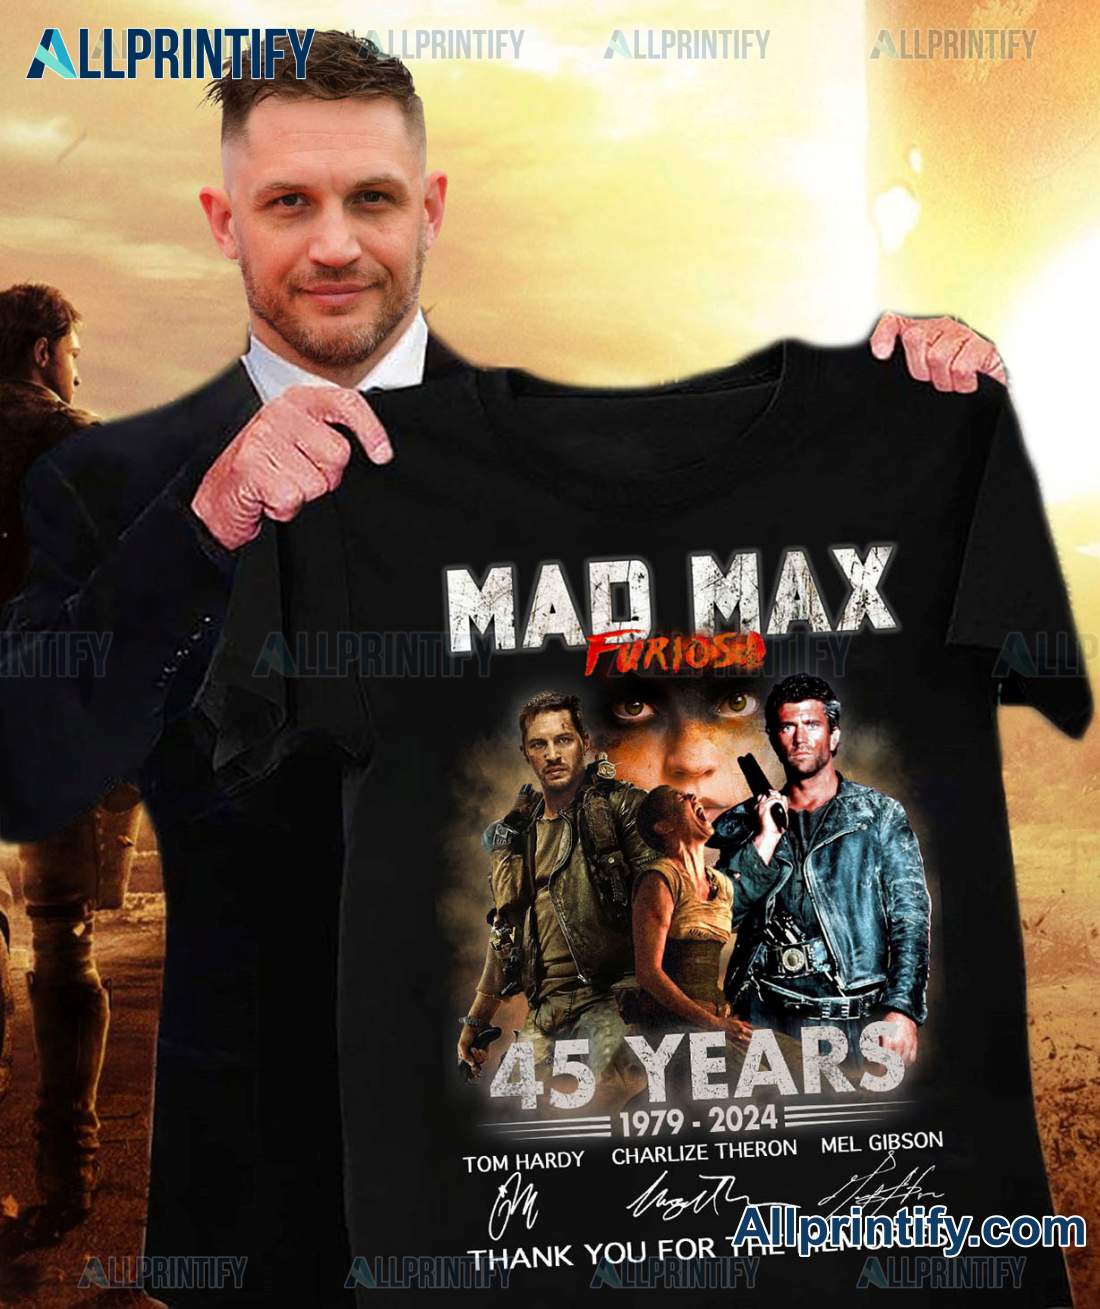 Mad Max Furiosa 45 Years 1979-2024 Signatures Thank You For The Memories Shirt, Hoodie